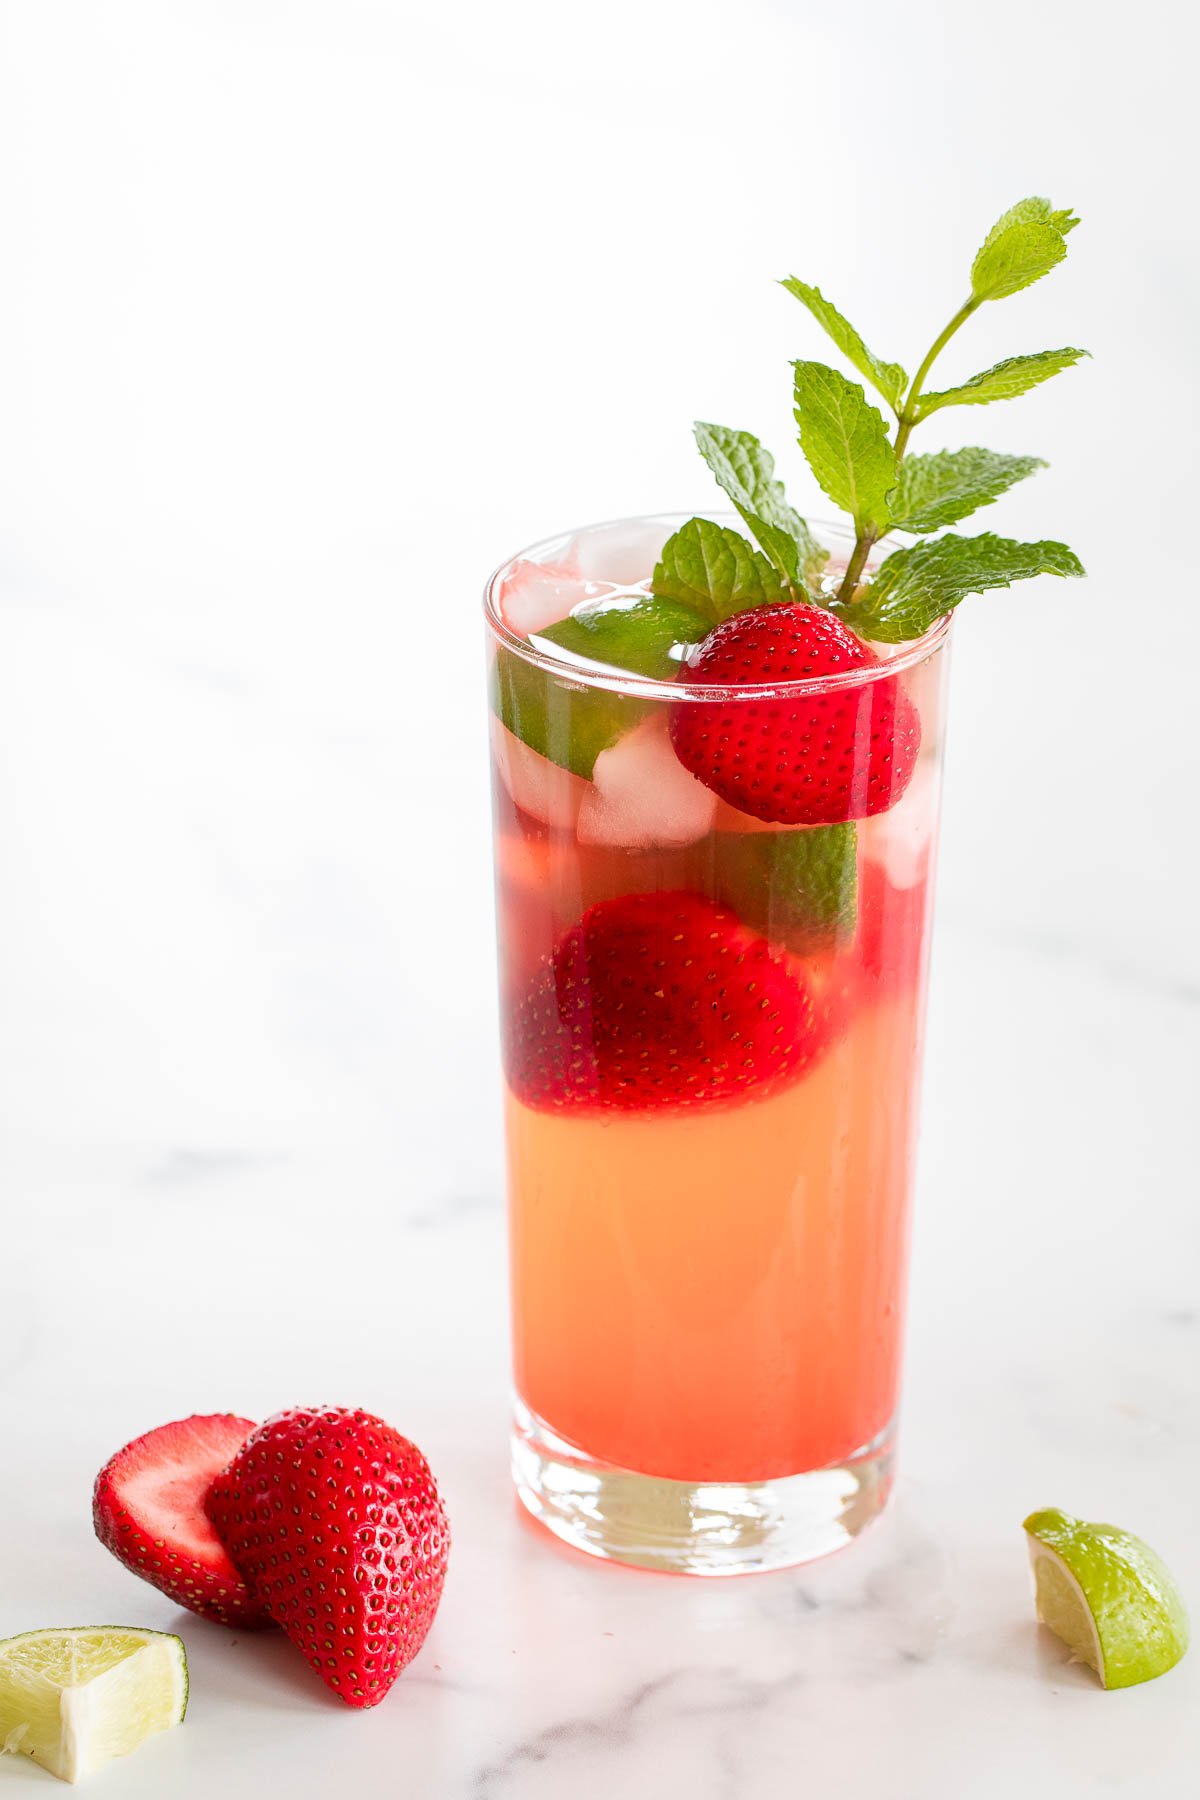 A tall glass filled with a pink drink garnished with whole strawberries, ice cubes, a slice of lime, and a sprig of mint. Showcasing one of the most refreshing strawberry recipes, this delightful beverage is complemented by two strawberry halves and a lime wedge on the white surface next to the glass.